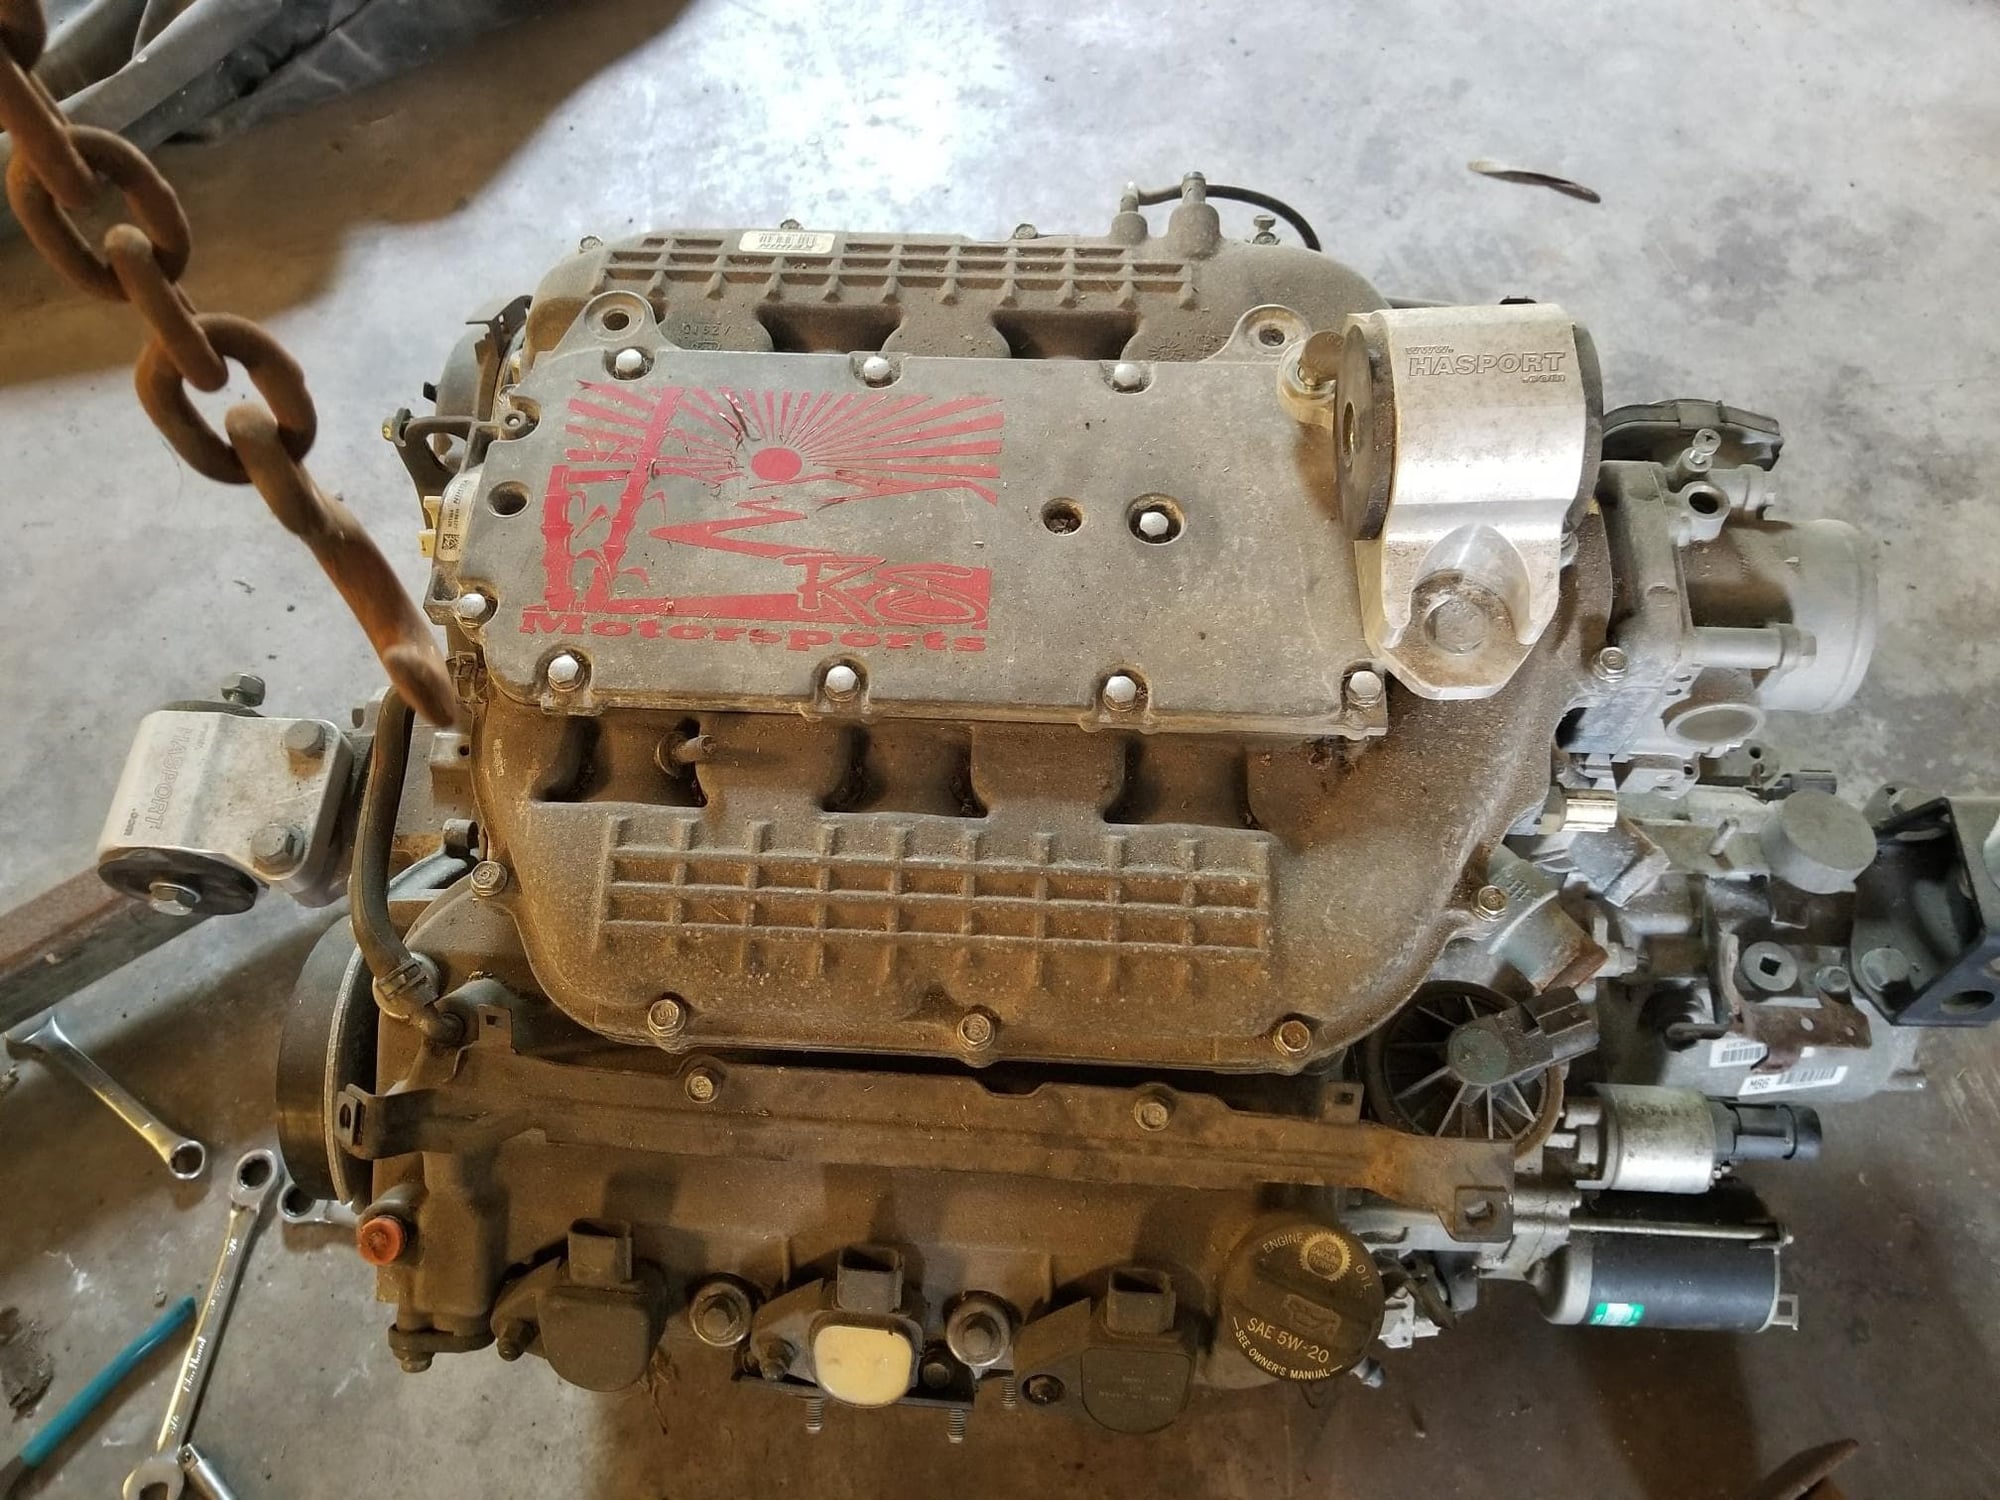 Engine - Intake/Fuel - FS: 07-08 tl type s intake manifold, runners, throttle body and top plate - Used - 2004 to 2008 Acura TL - Brownsville, TX 78520, United States